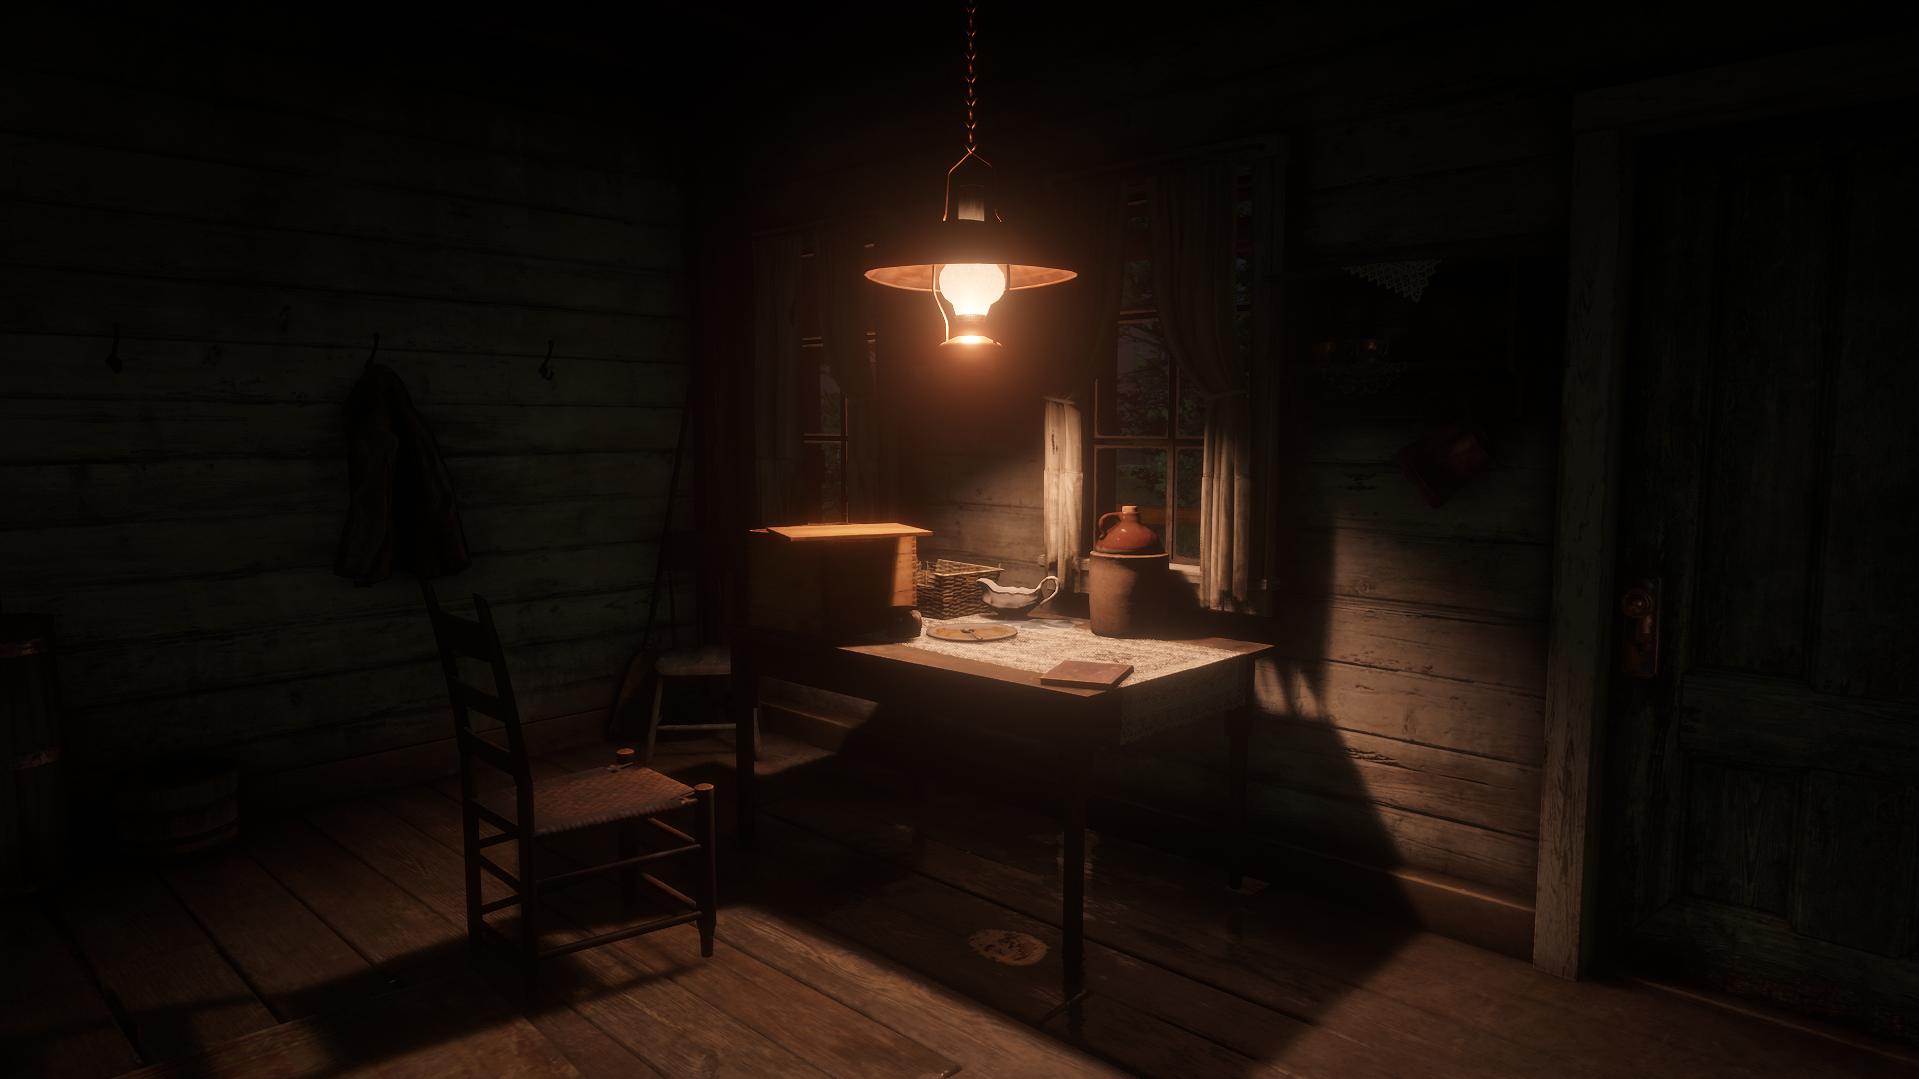 Red Dead Redemption Red Dead Redemption 2 Soft Shading Room Video Games CGi Interior Window Chair La 1919x1079